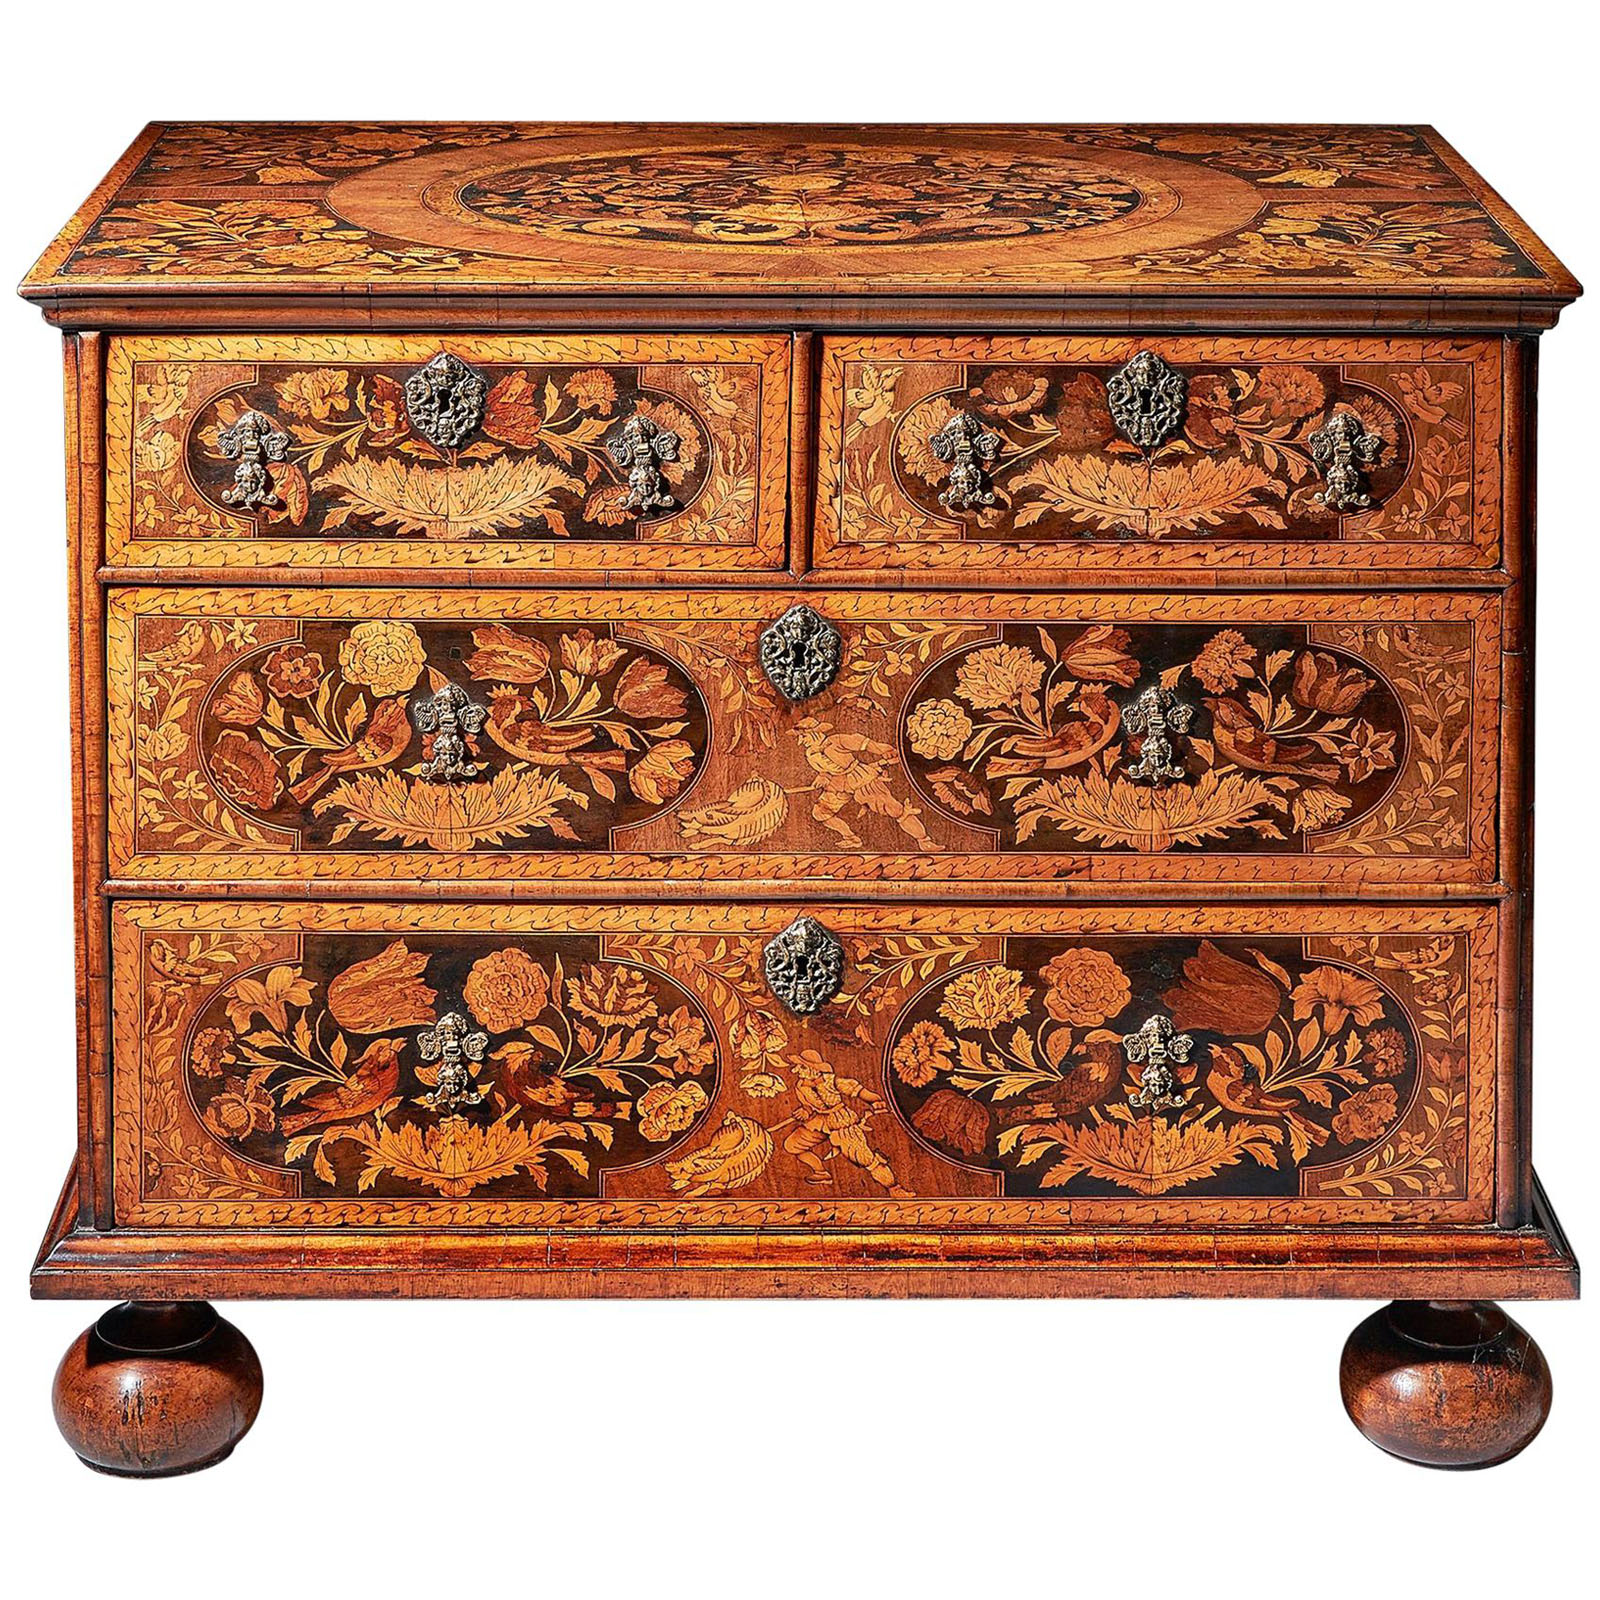 18th century Italian mahogany chest of drawers, with three drawers and  floral marquetry inlay, 138cm